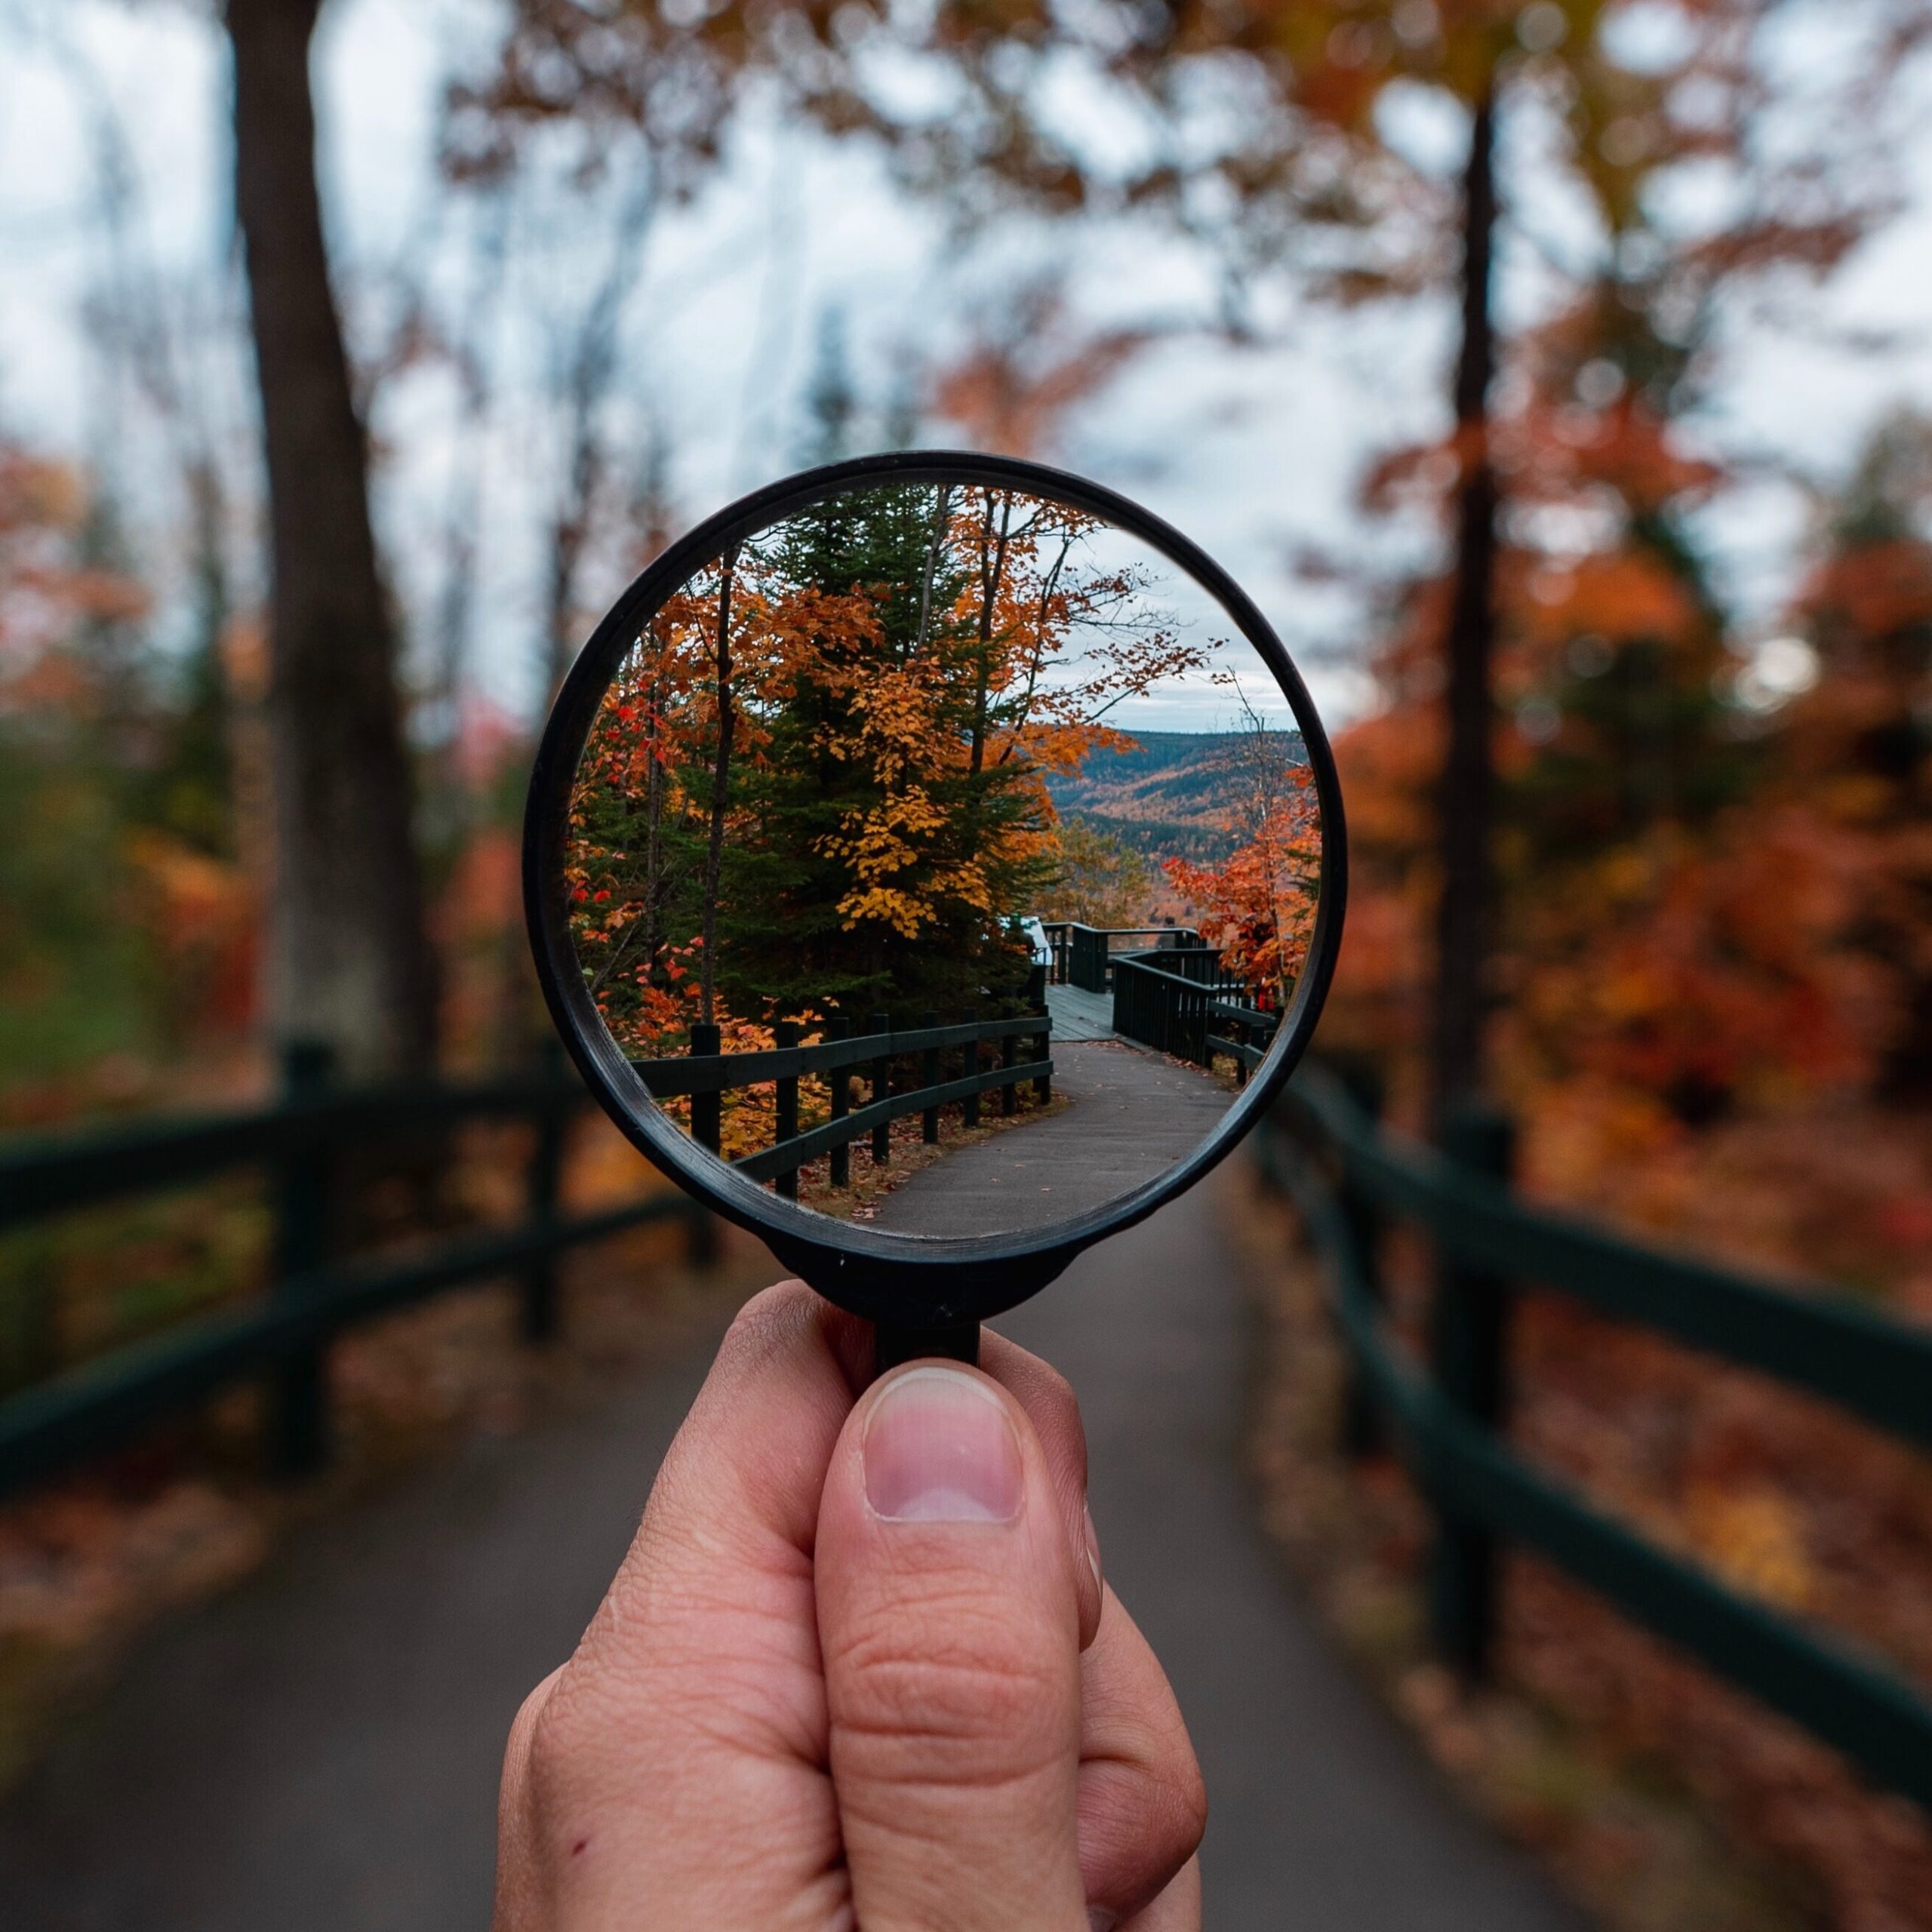 A hand holds a magnifying glass in front of a pathway surrounded by trees.